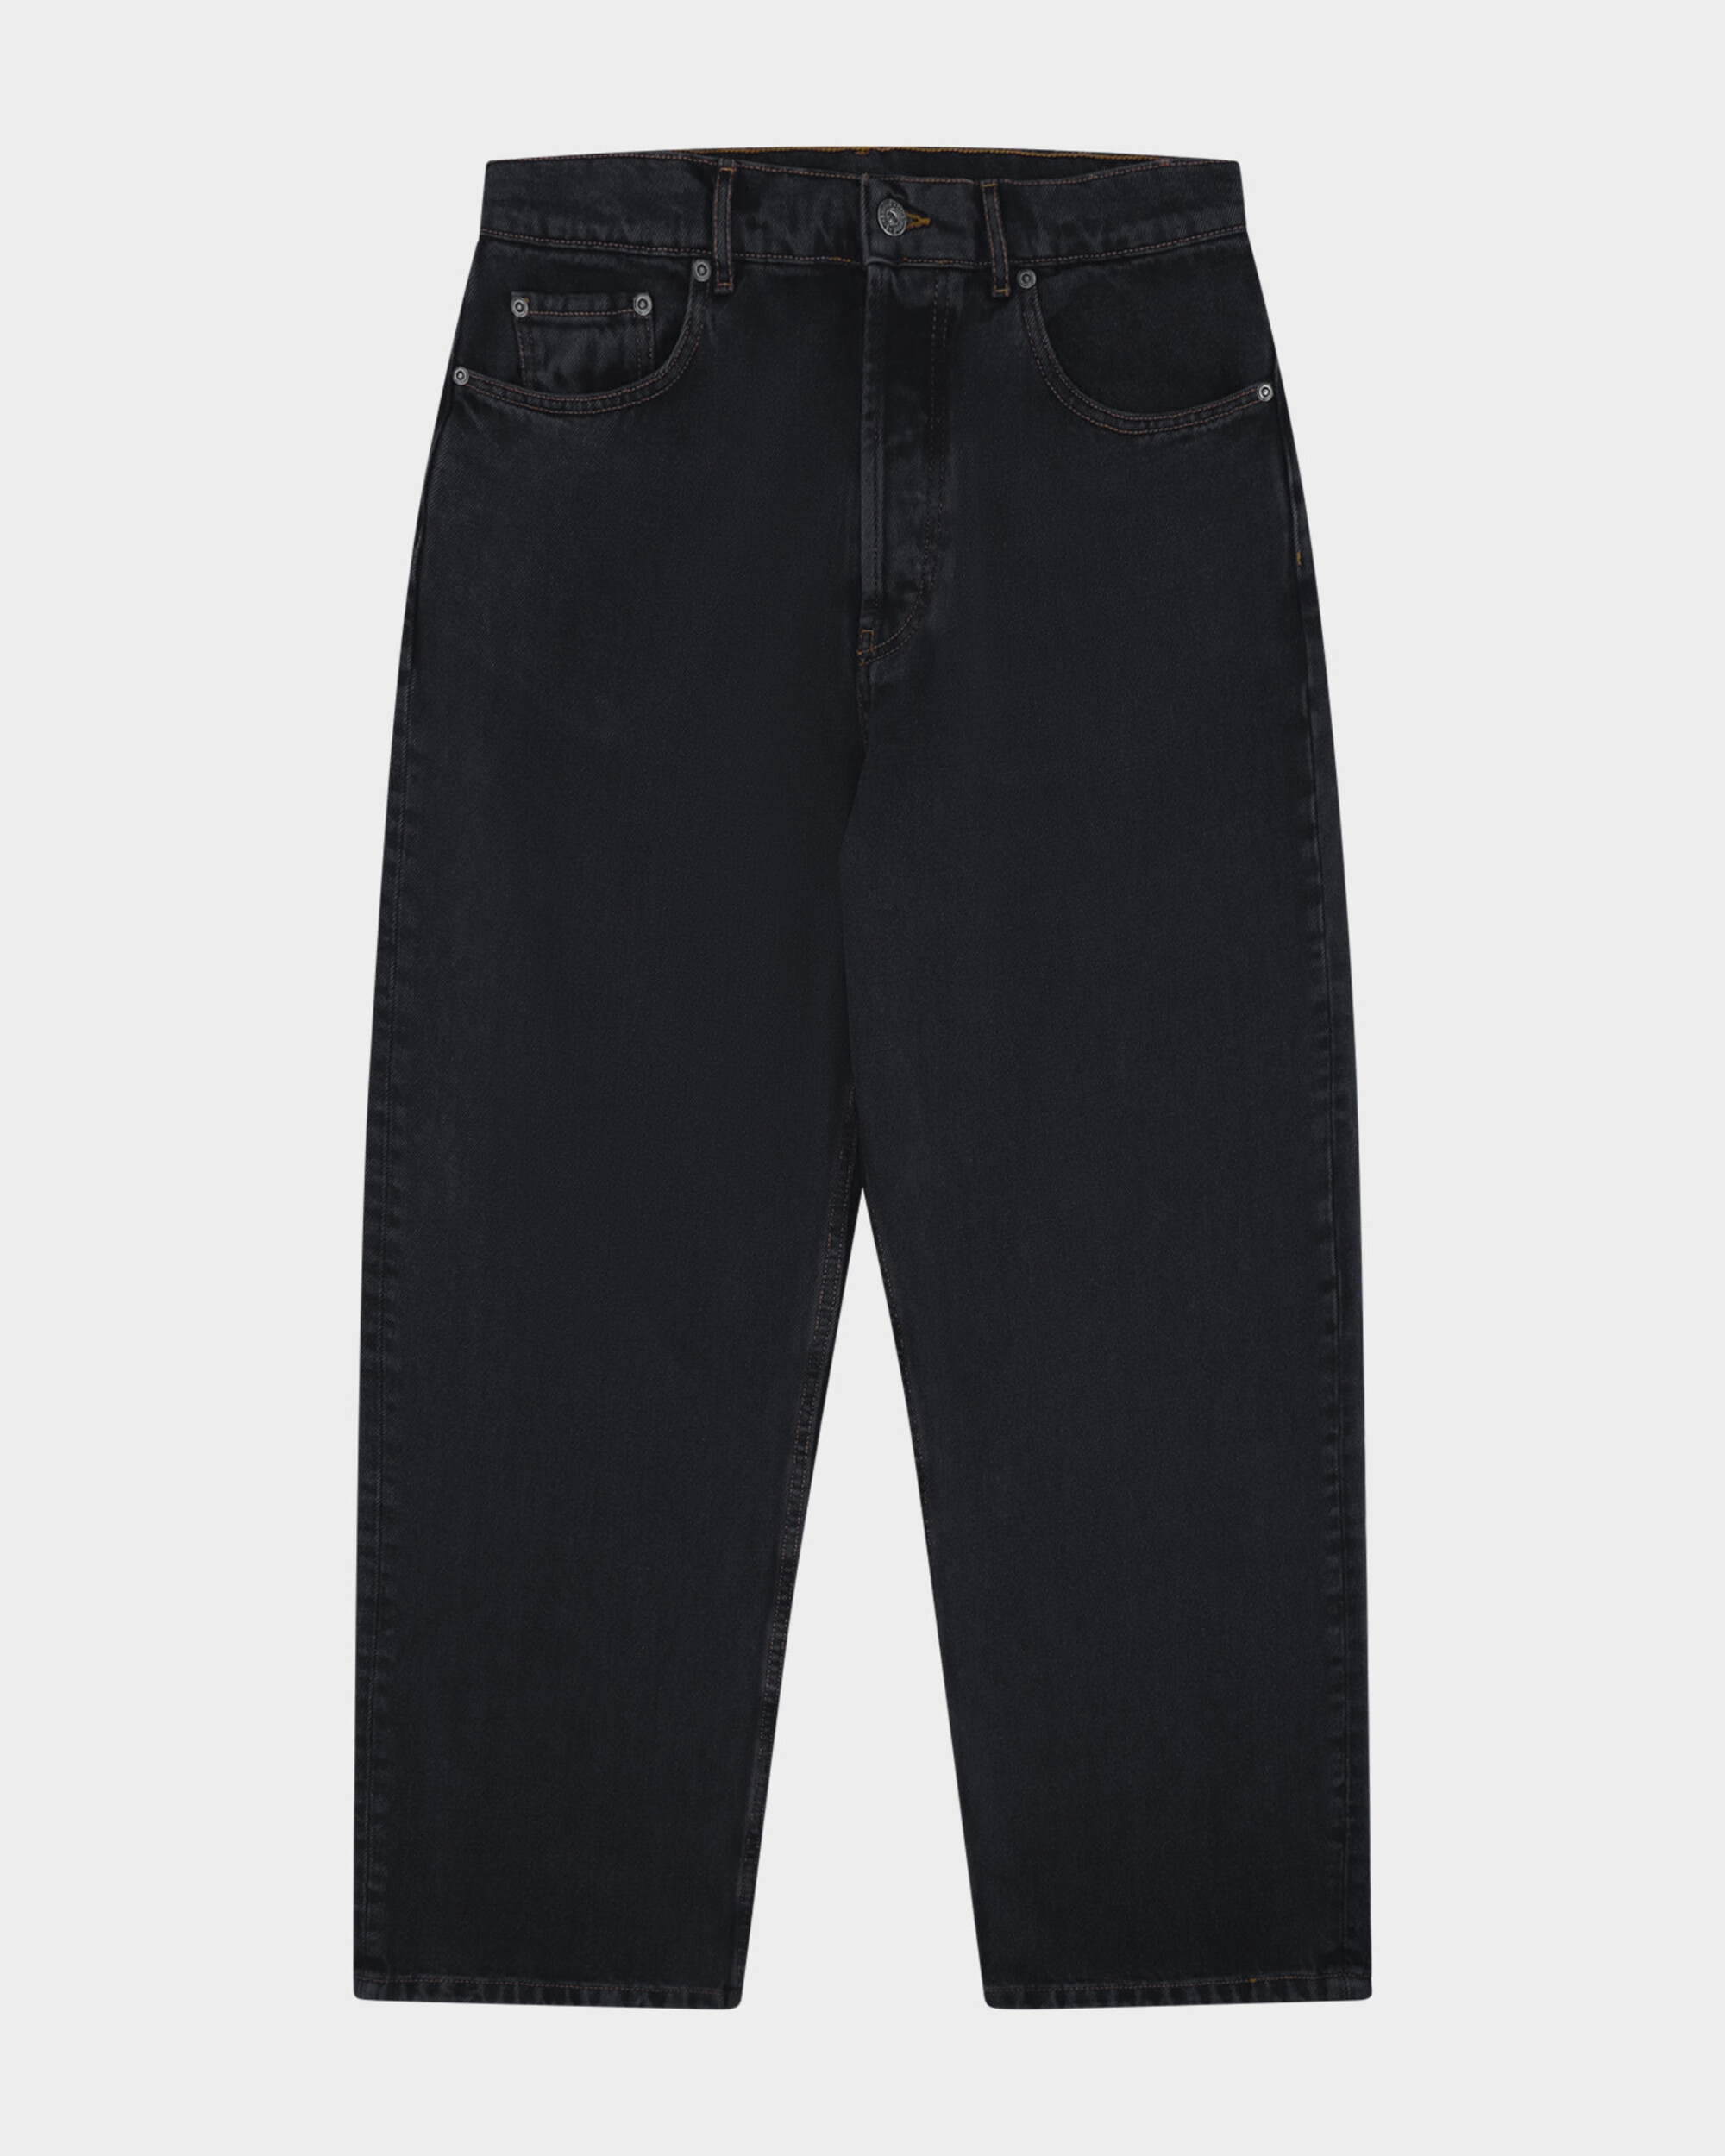 Lockwood Classic Relaxed Jeans - Black Olive